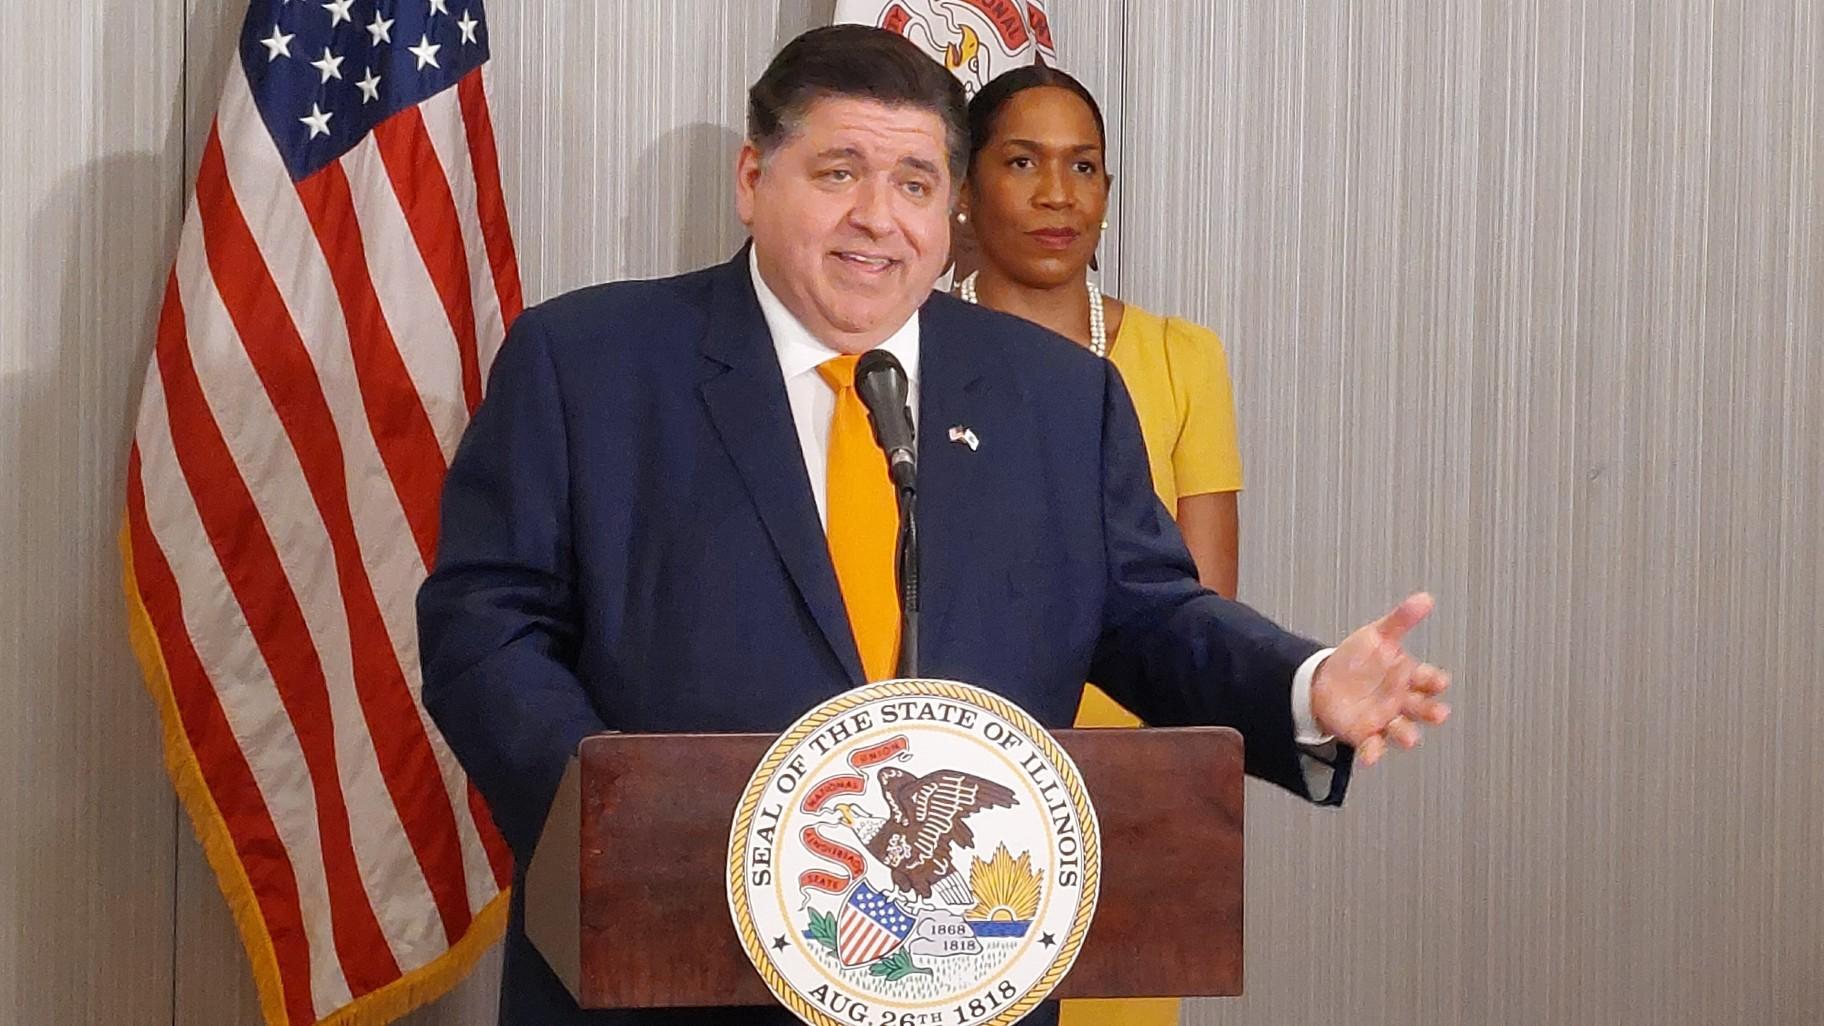 Gov. J.B. Pritzker speaks the day after his re-election on Nov. 9, 2022. (Alonzo Stallings / WTTW News)